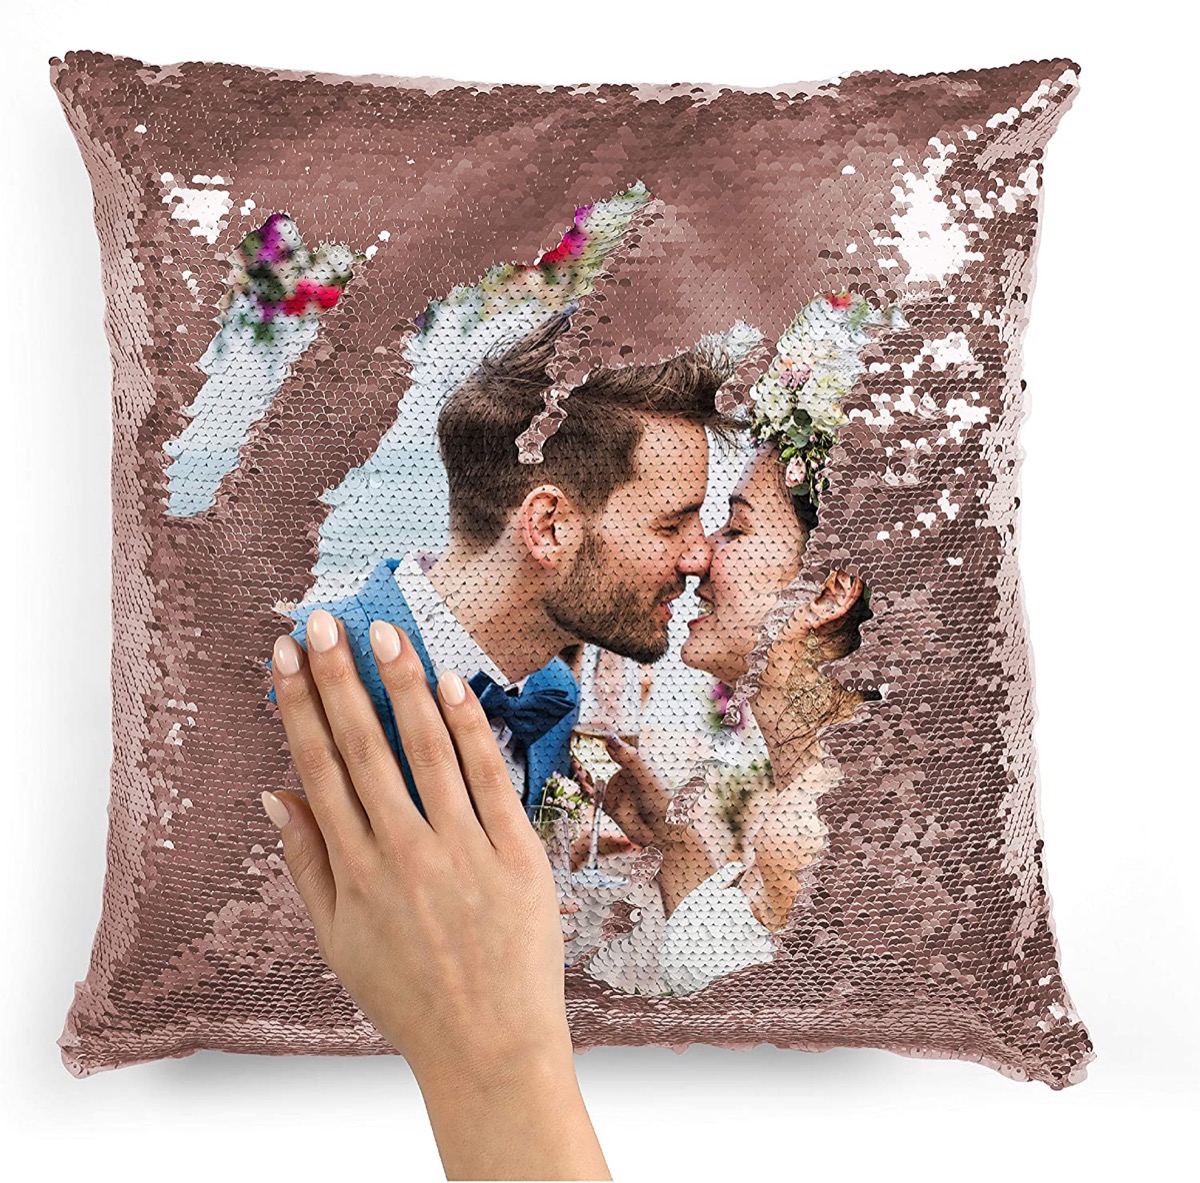 Sequin pillow case with image